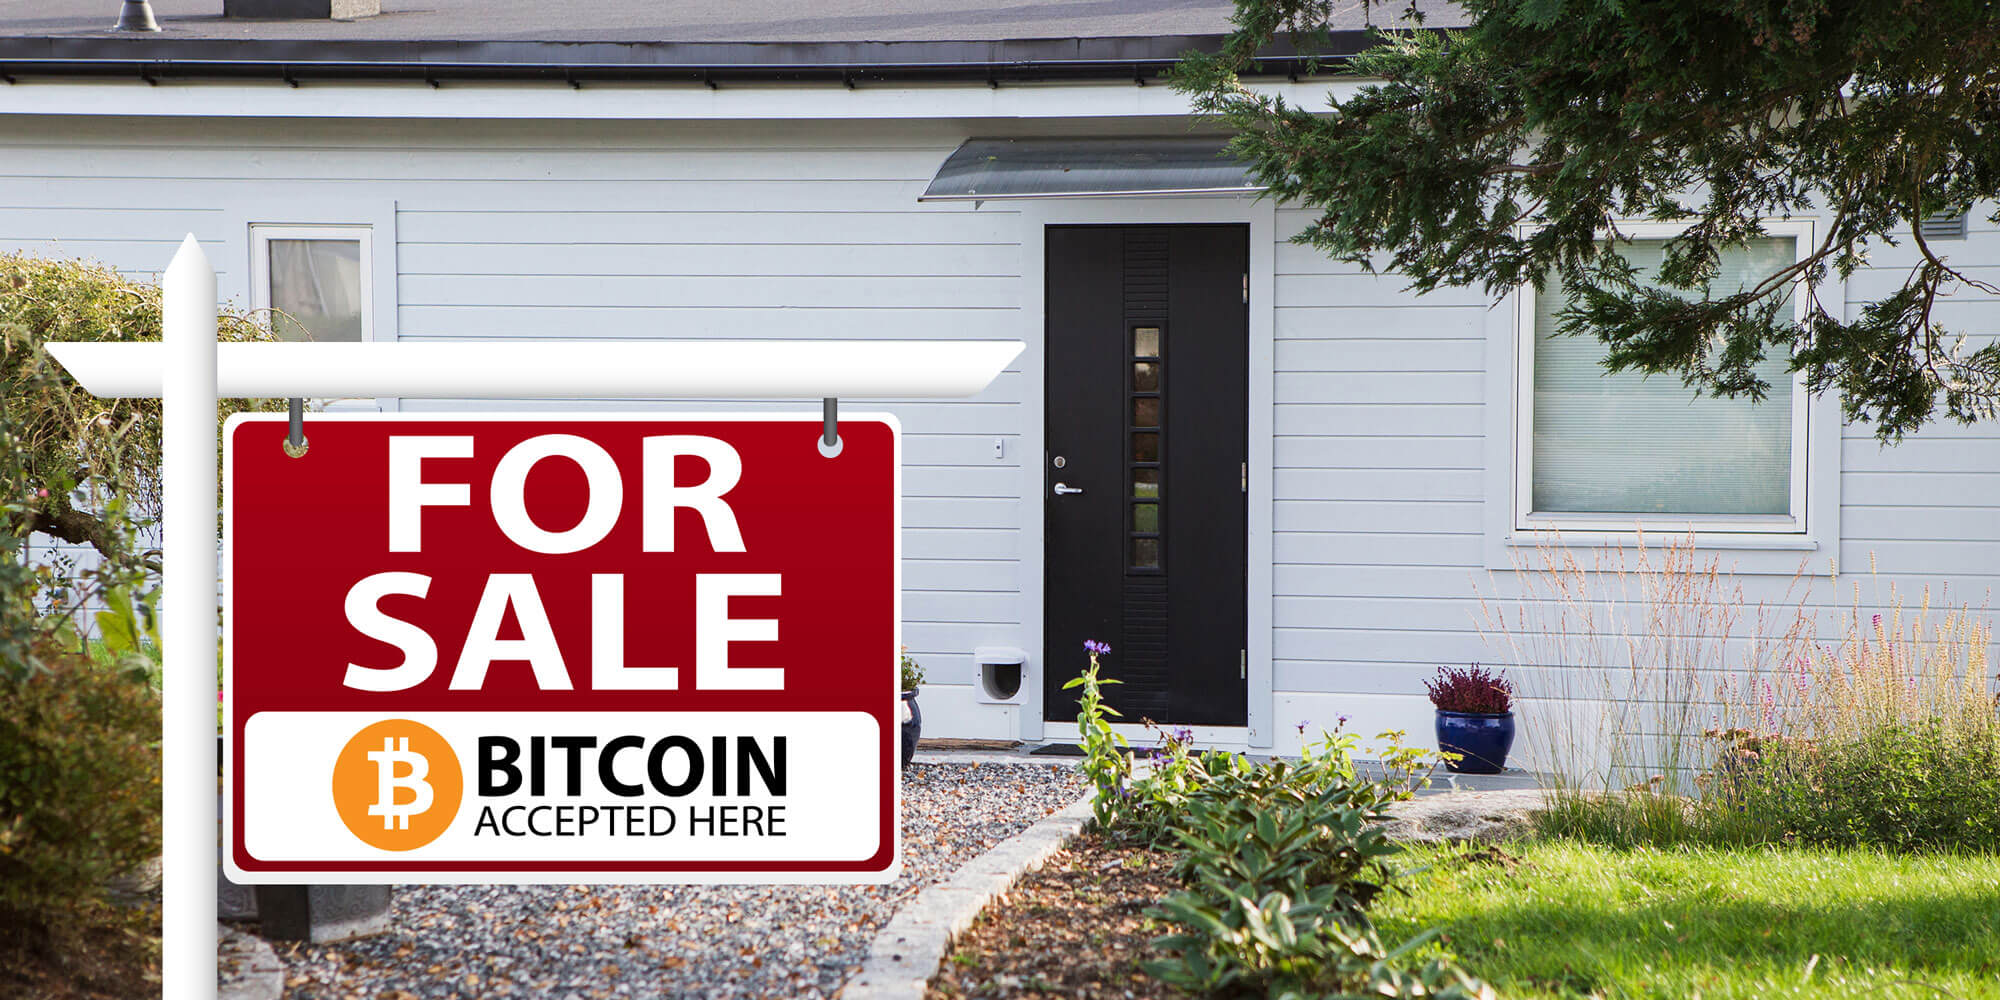 Cryptocurrencies and home loans